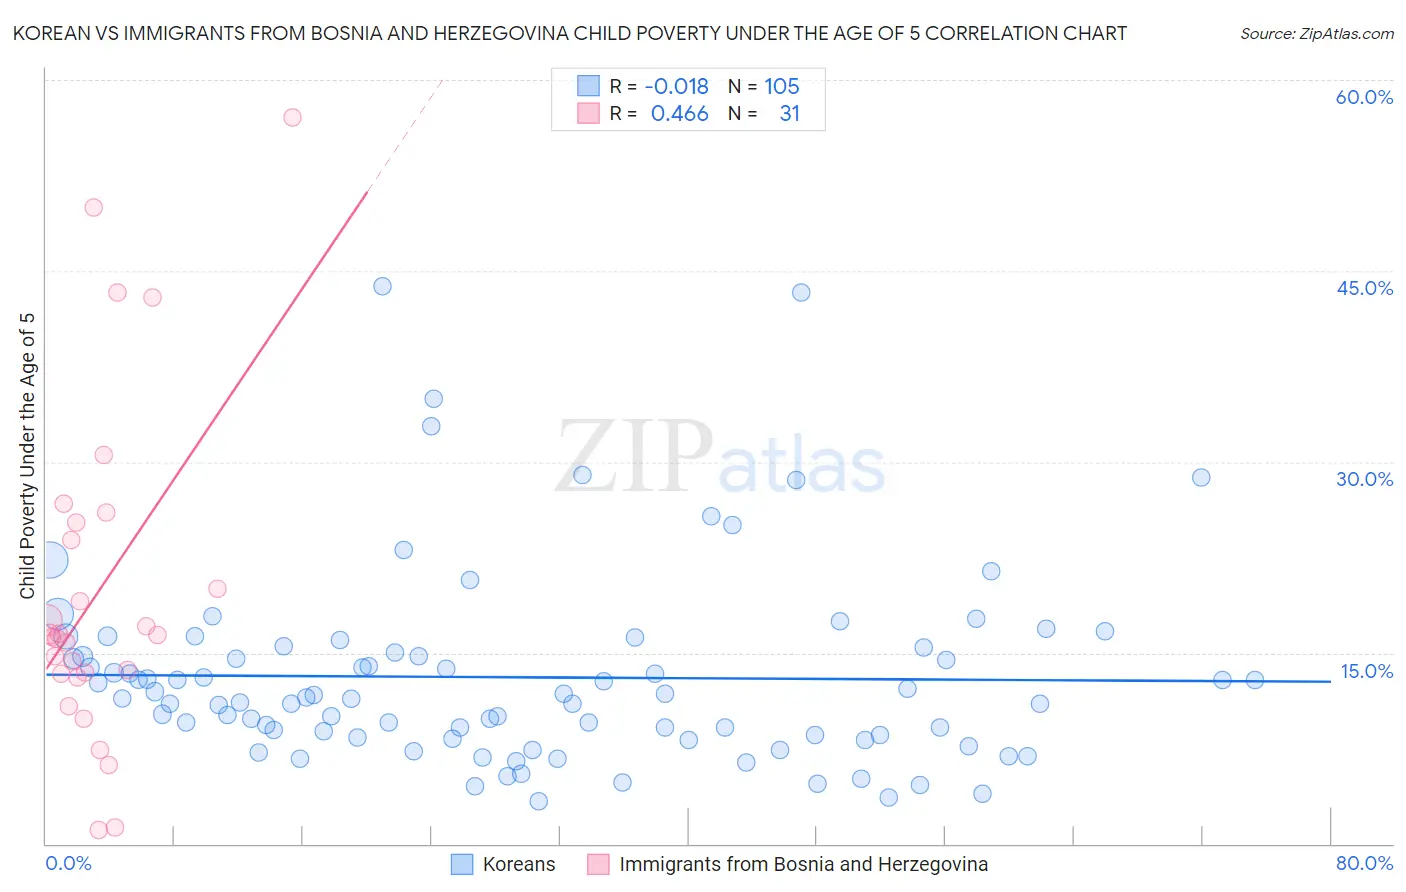 Korean vs Immigrants from Bosnia and Herzegovina Child Poverty Under the Age of 5